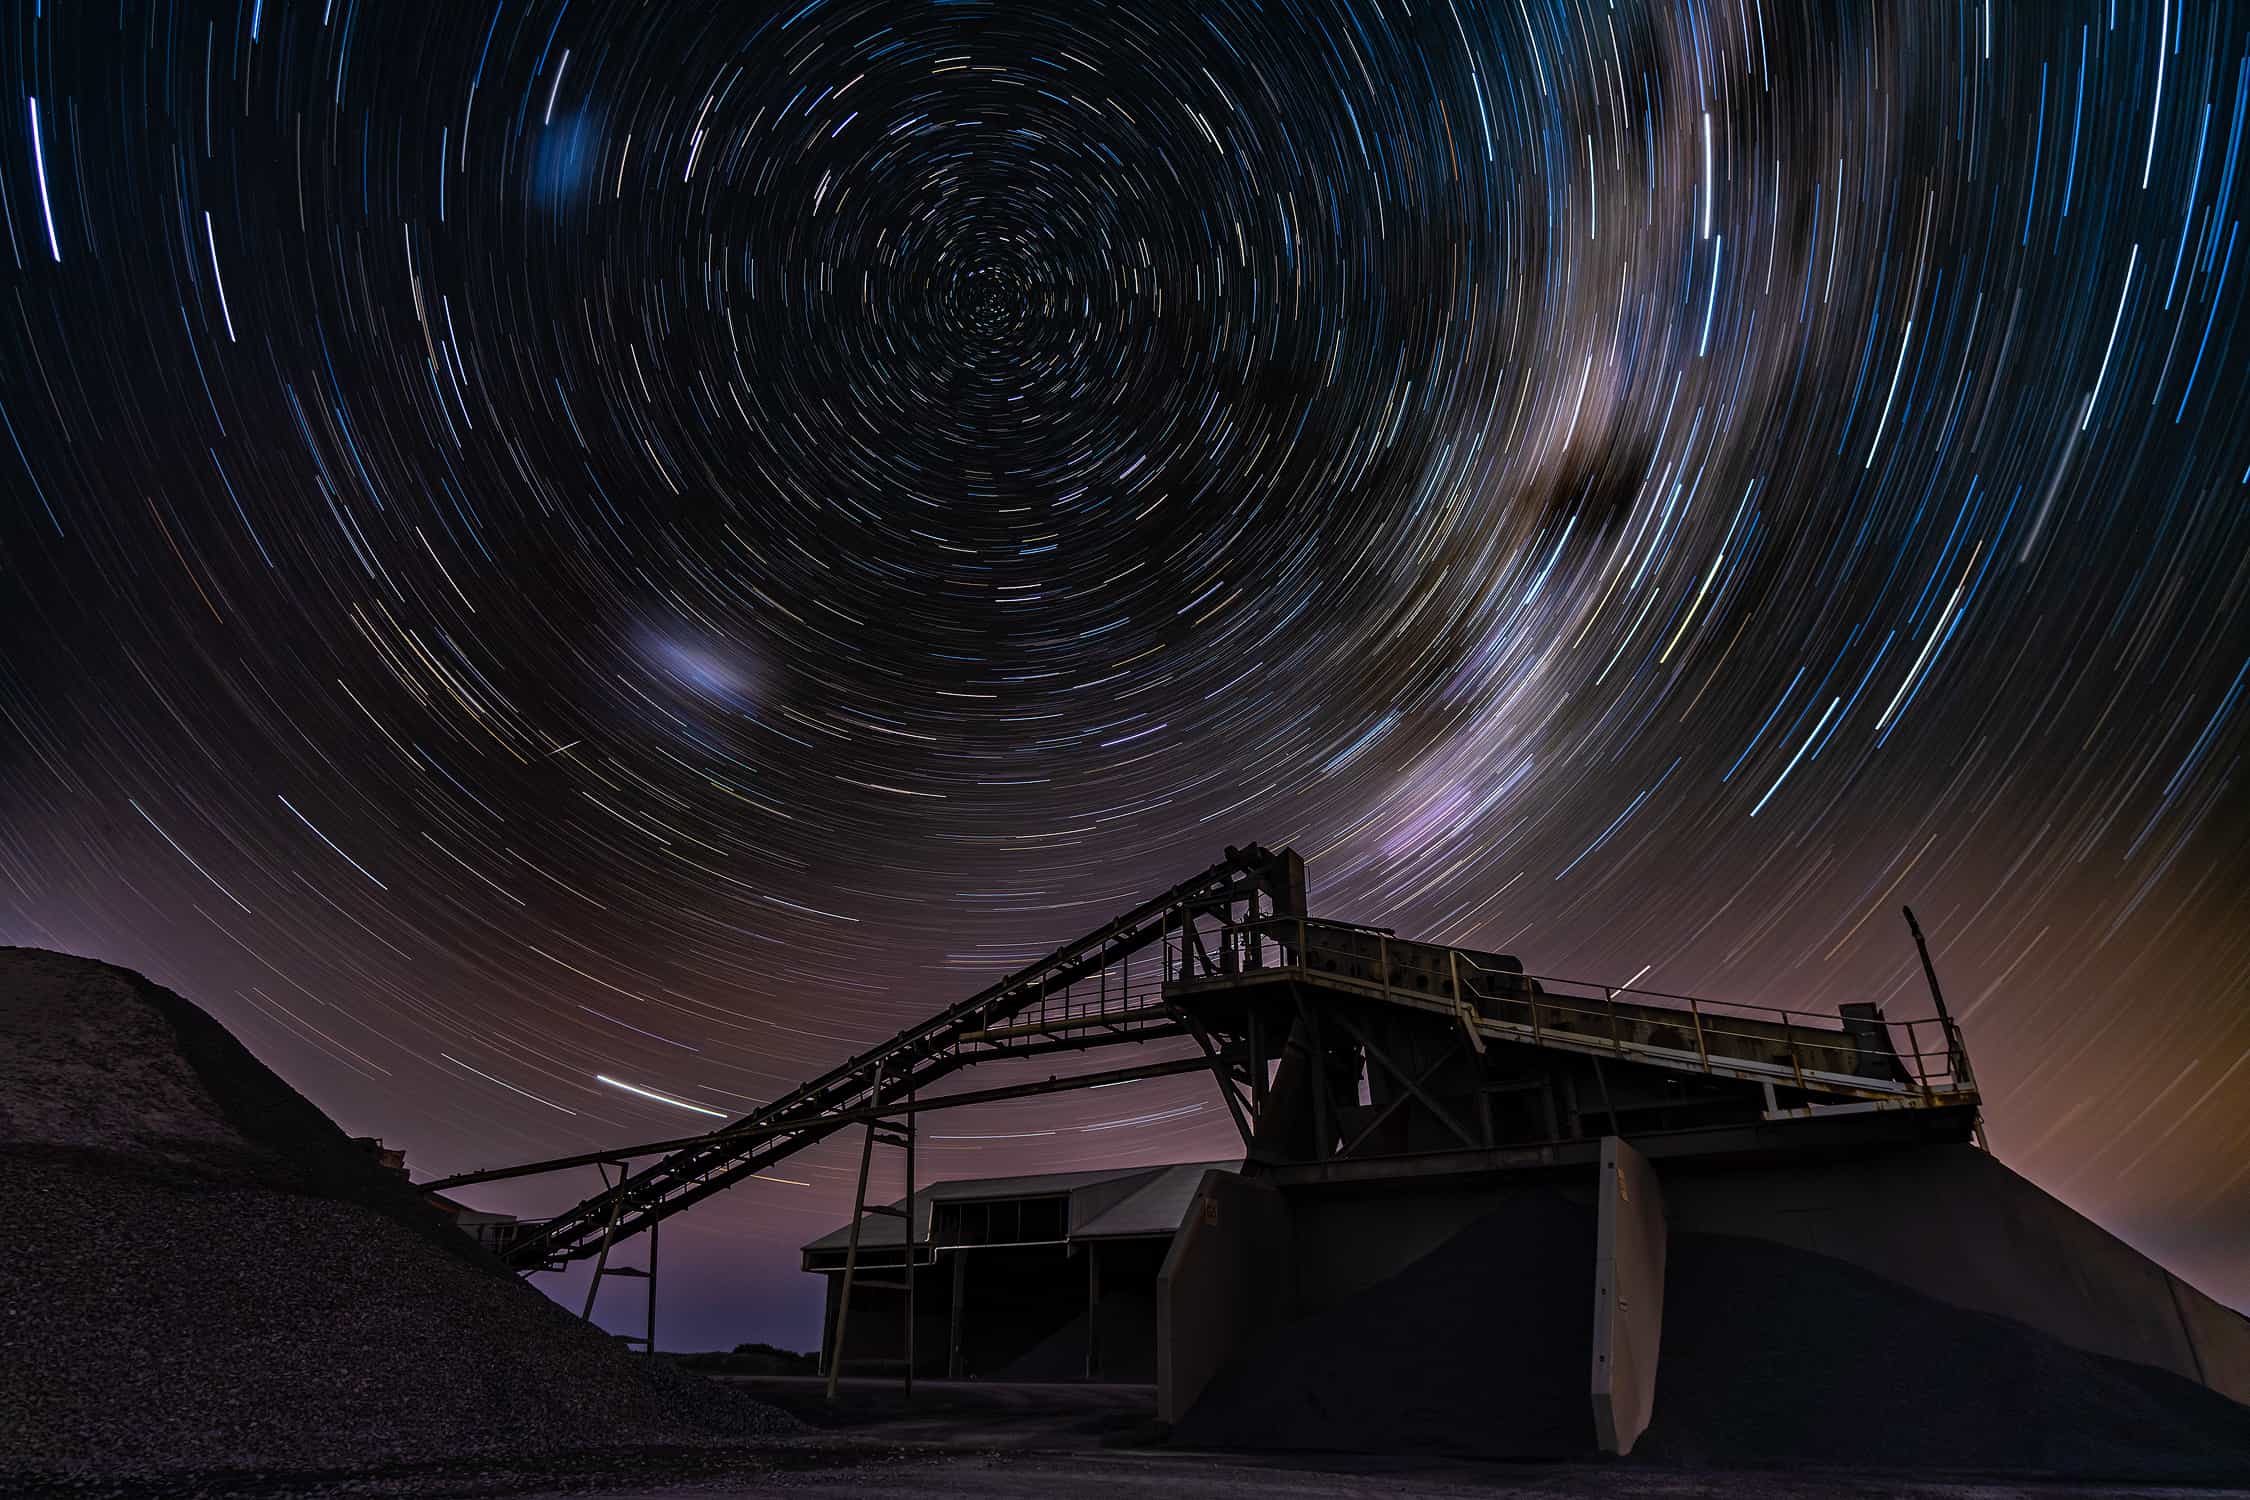 Very dark spooky image taken at Blackhead quarry in Dunedin. The artist set cammera setting to brightest daylight settings, with exception of exposure which had the camera fiming for over 1200 seconds. The image has brytal industrial quarry equipment and conveyor silhouetted against back drop of smooth circular star trails around South celestial pole.